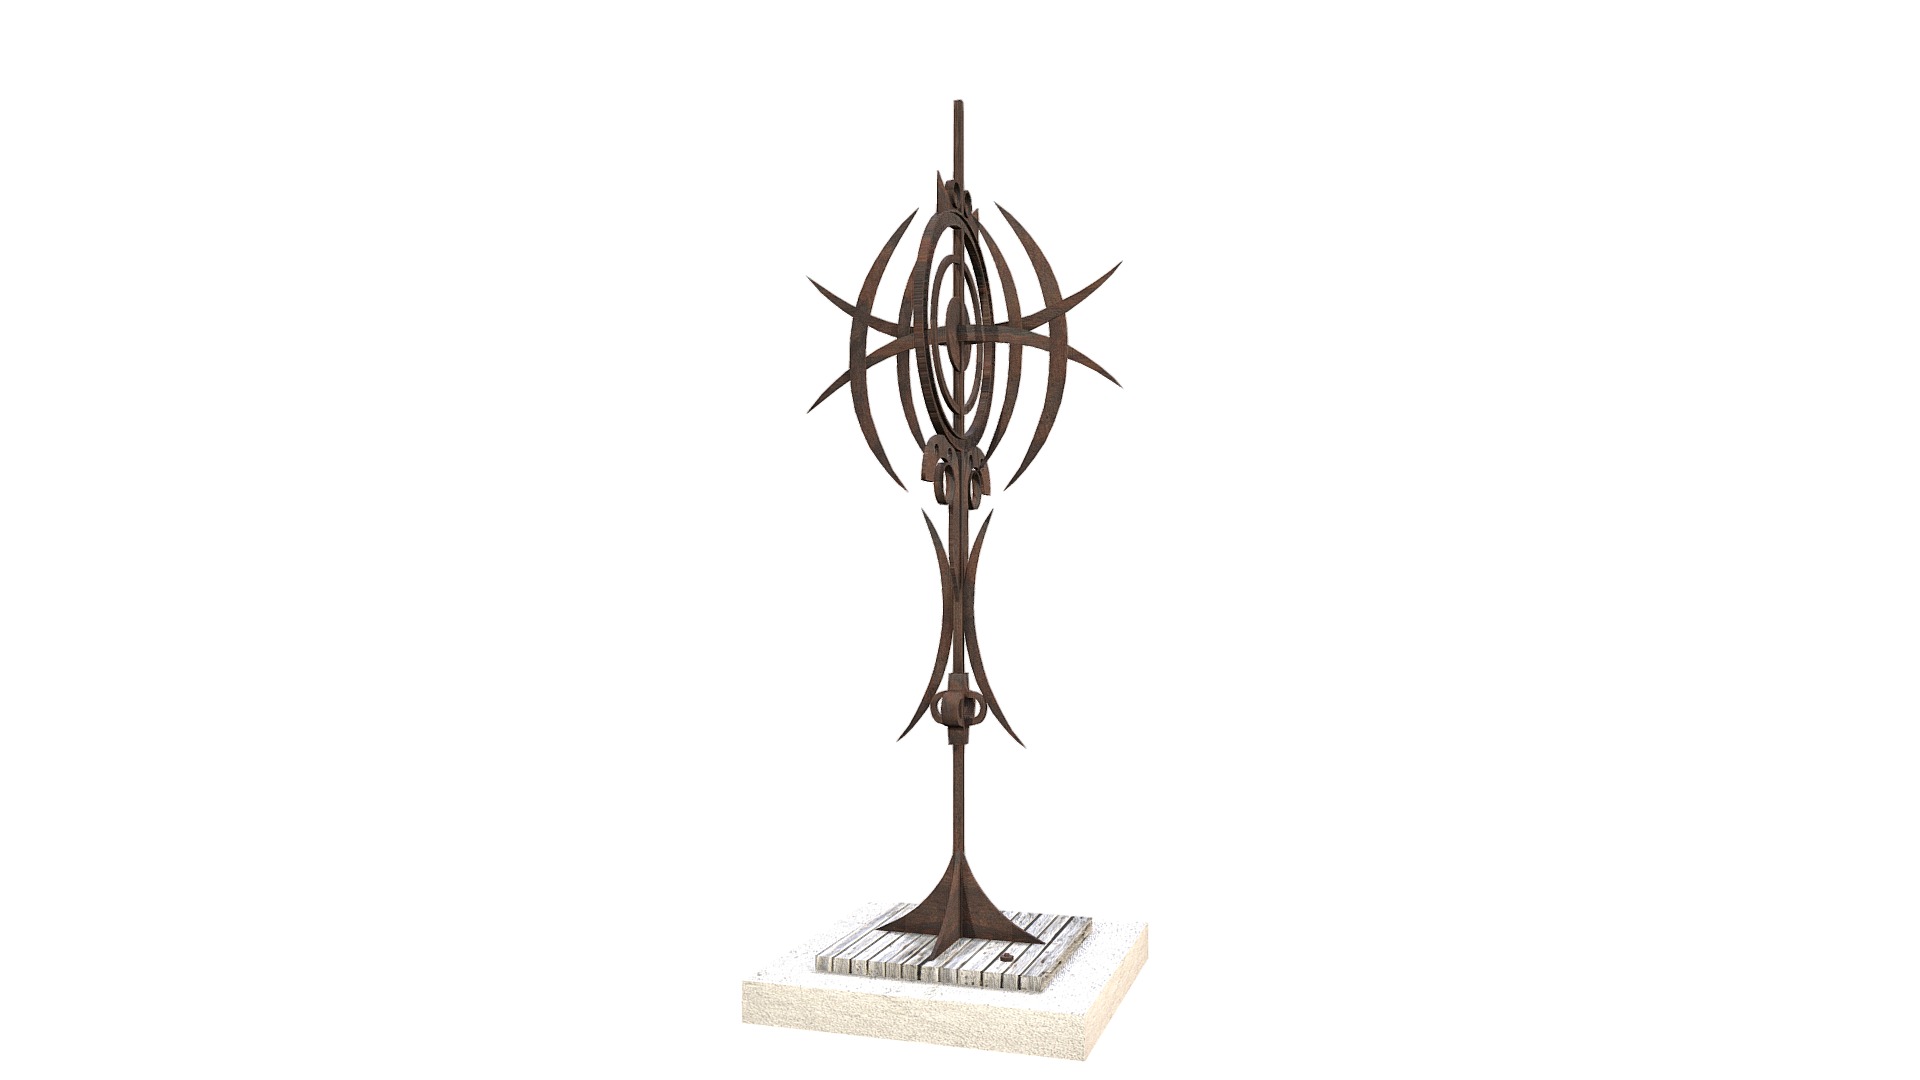 3D model Medialunas - This is a 3D model of the Medialunas. The 3D model is about a trophy with a gold top.